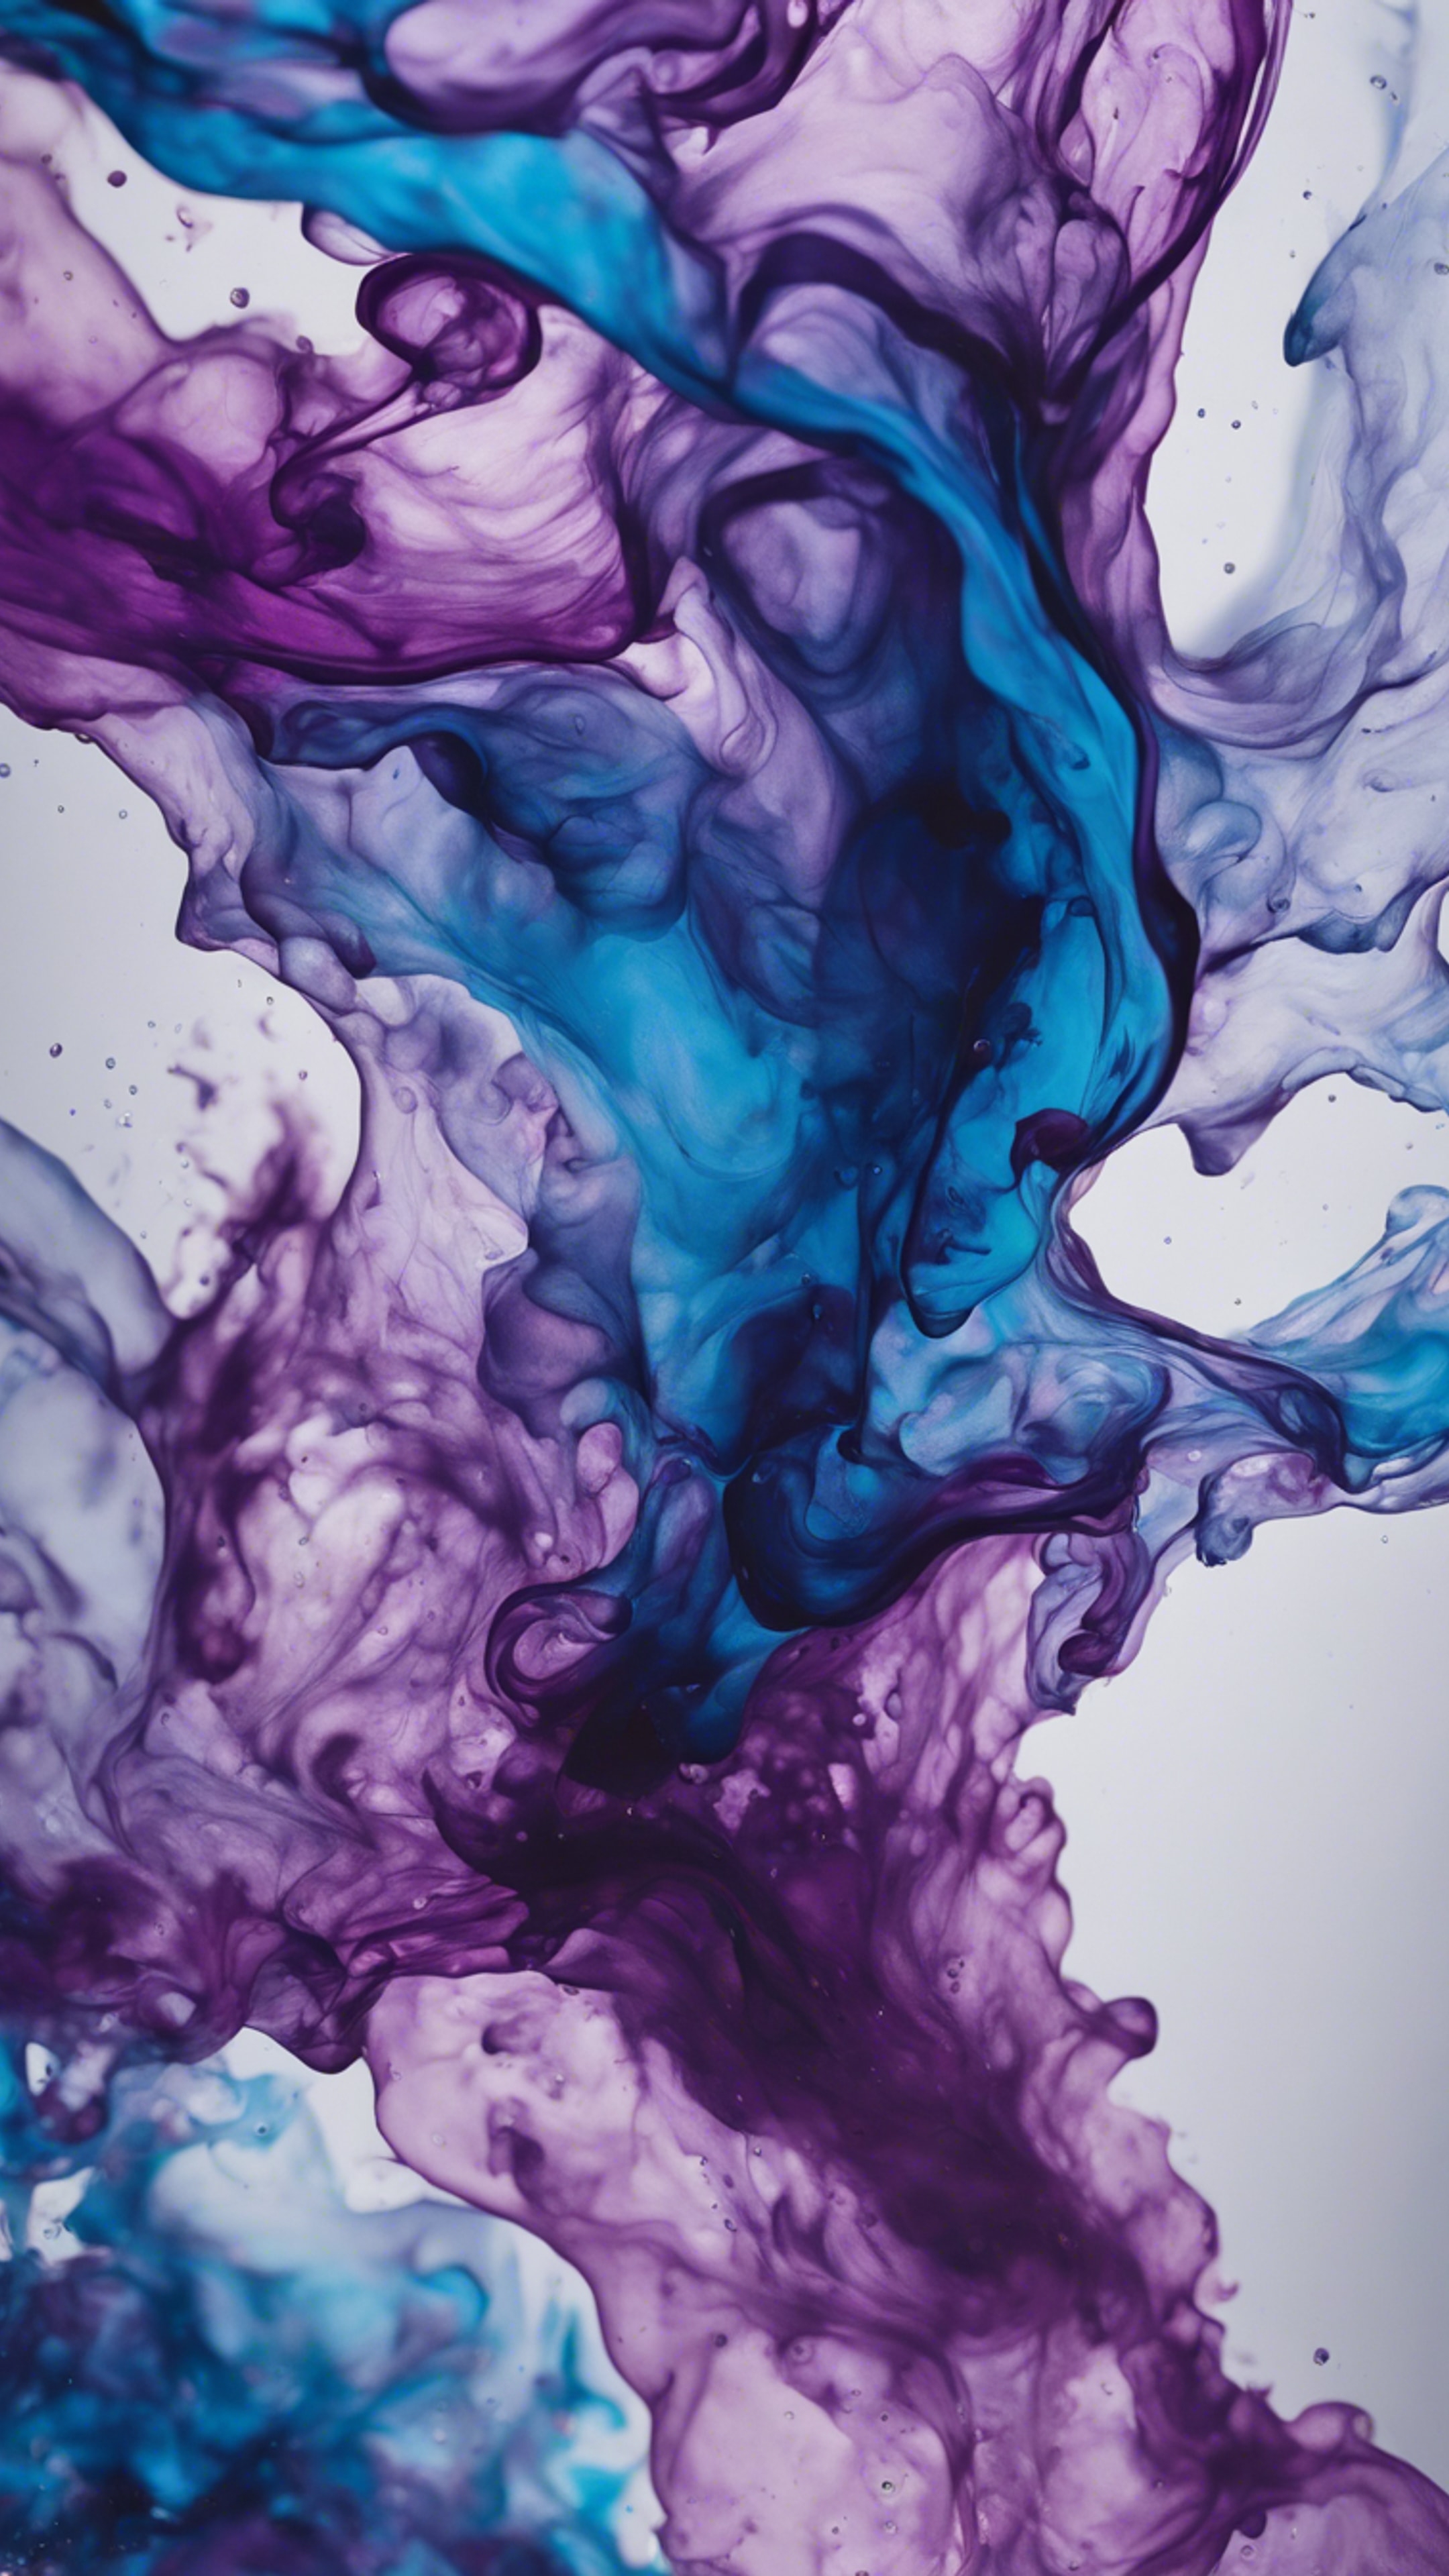 An abstract fluid art piece with swirling waves of ink in hues of cool blue and passionate purple. Tapeta[1f0e9ffb93e84991a030]